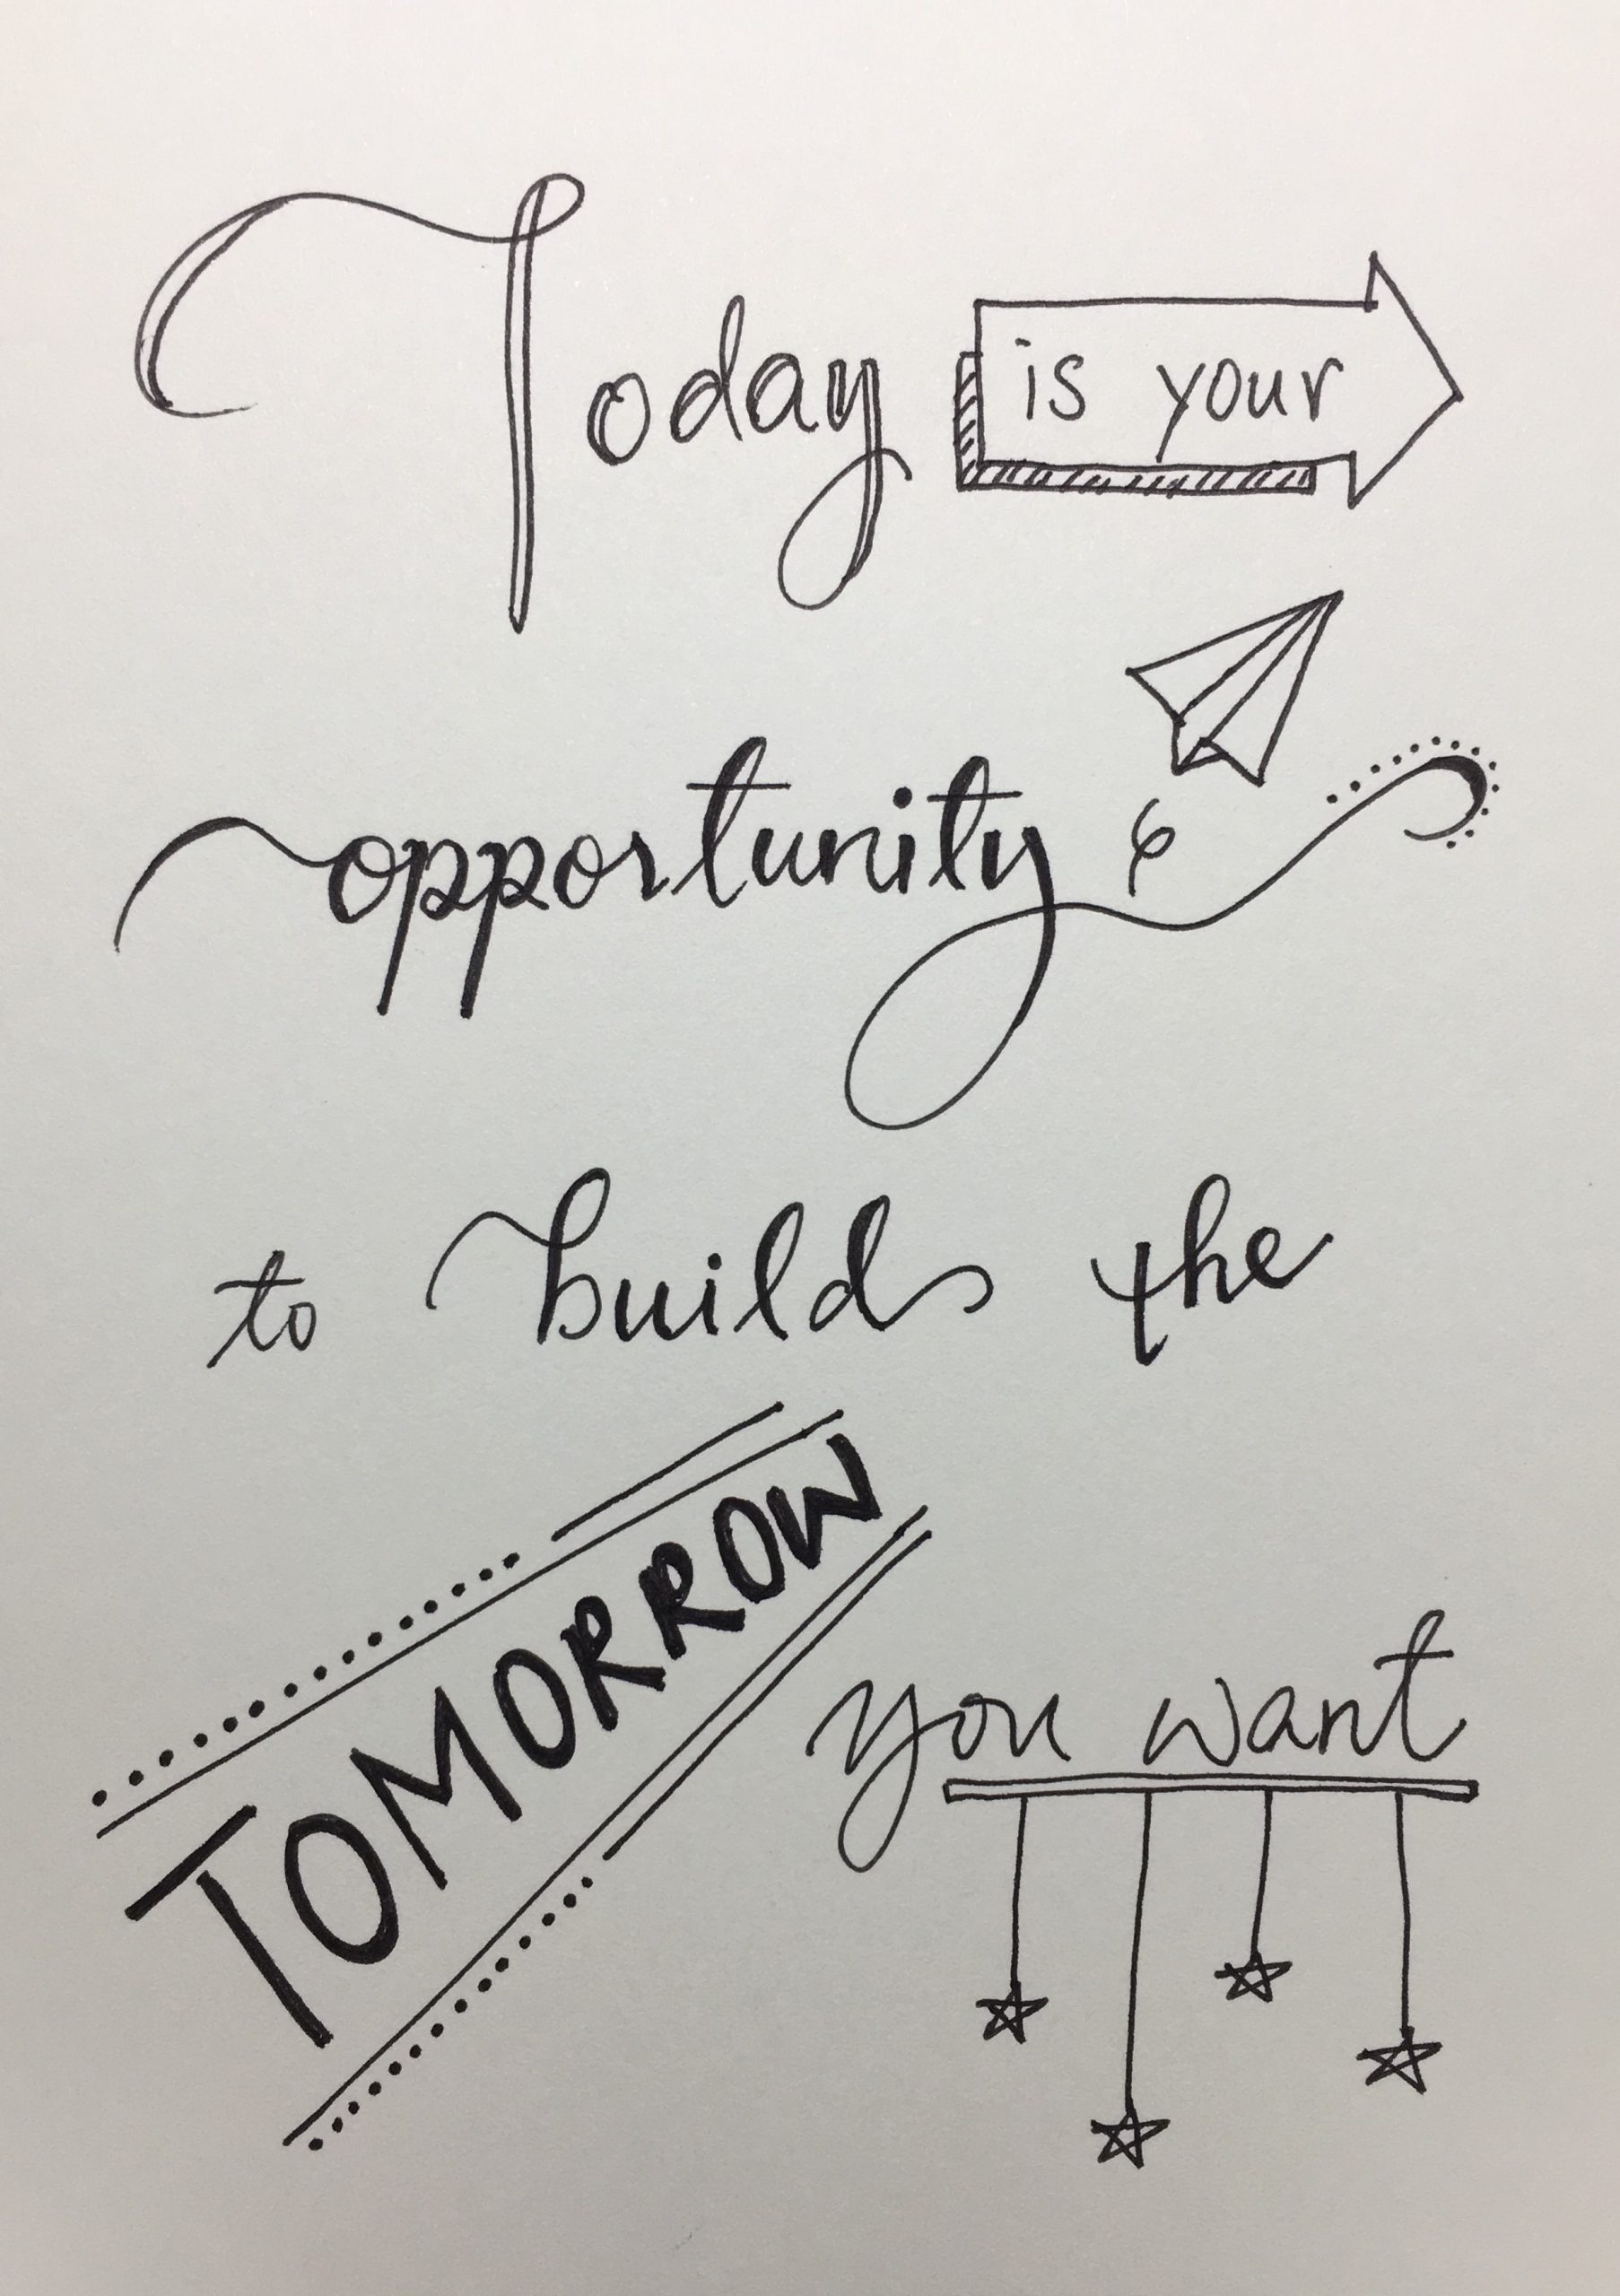 Today is Your Opportunity to Build the Tomorrow You Want